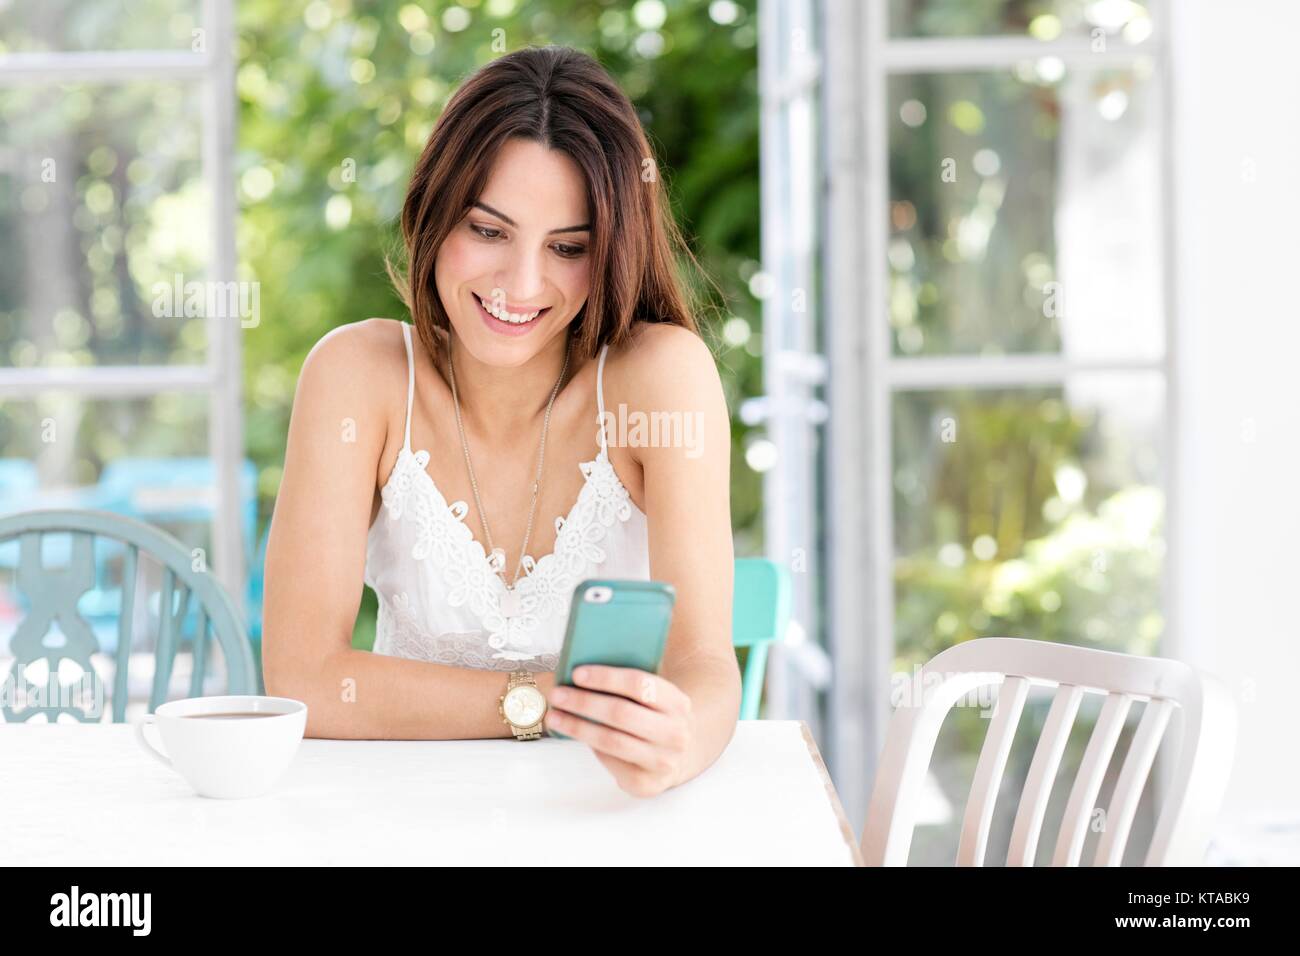 Young woman texting on smartphone. Banque D'Images